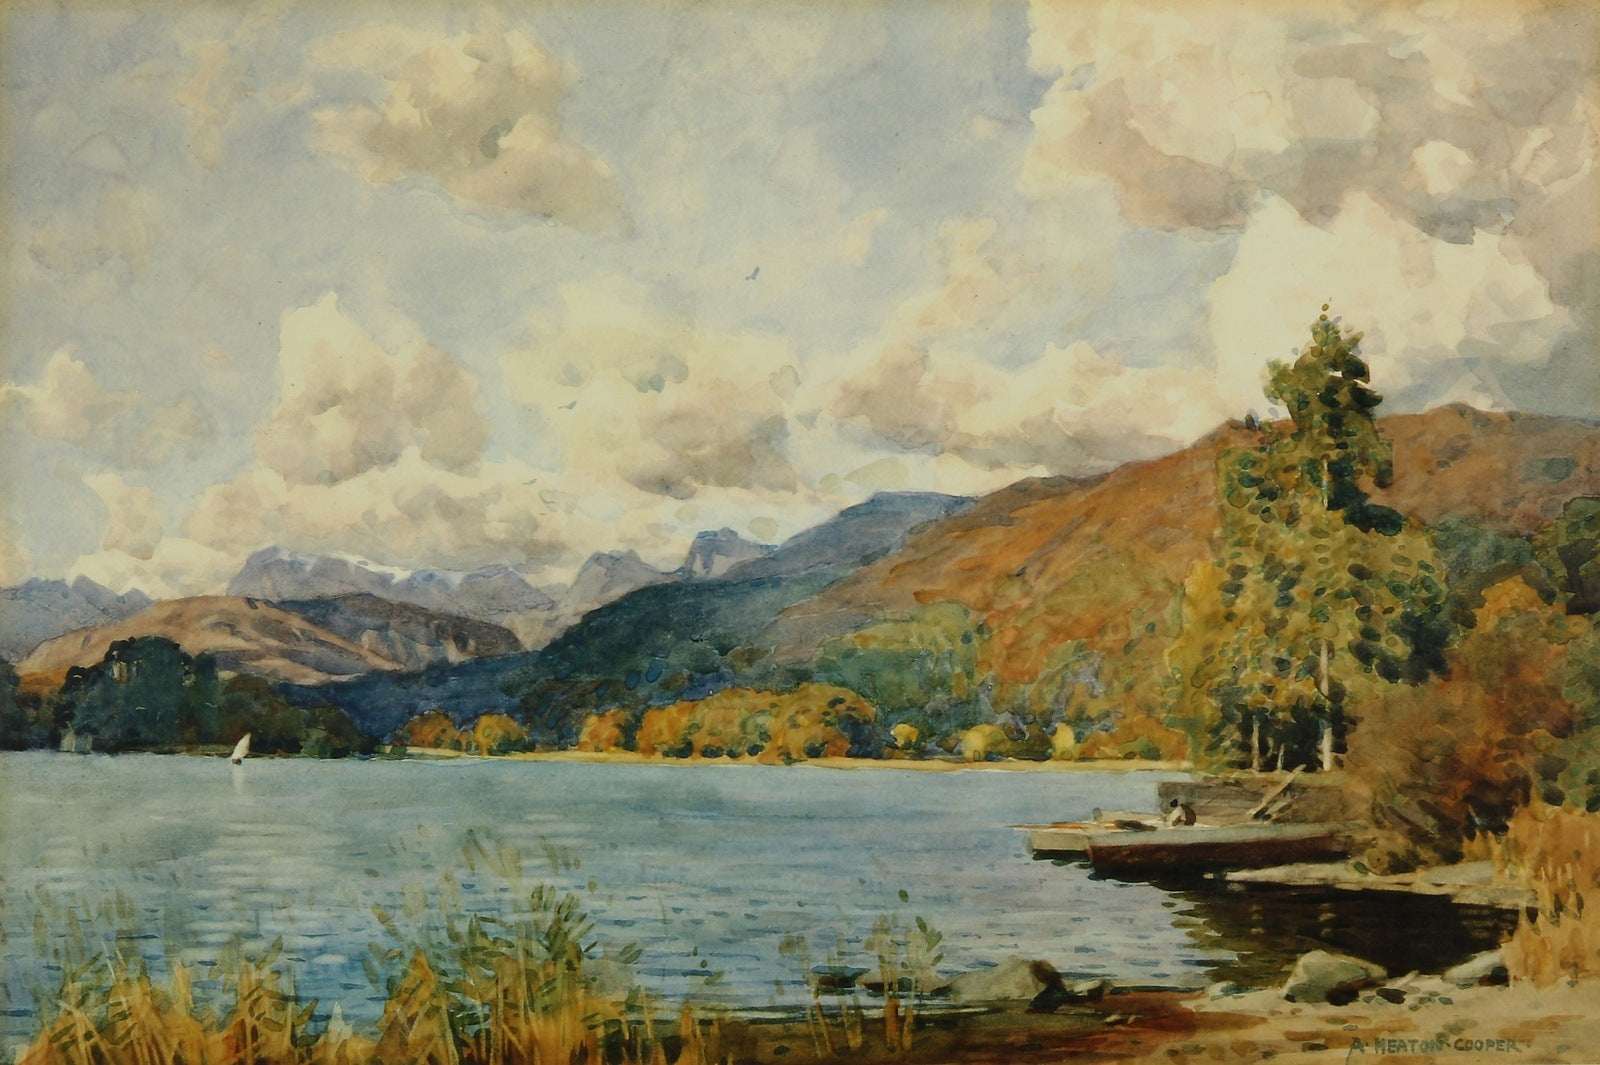 Windermere and Langdale Pikes from Waterhead by Alfred Heaton Cooper